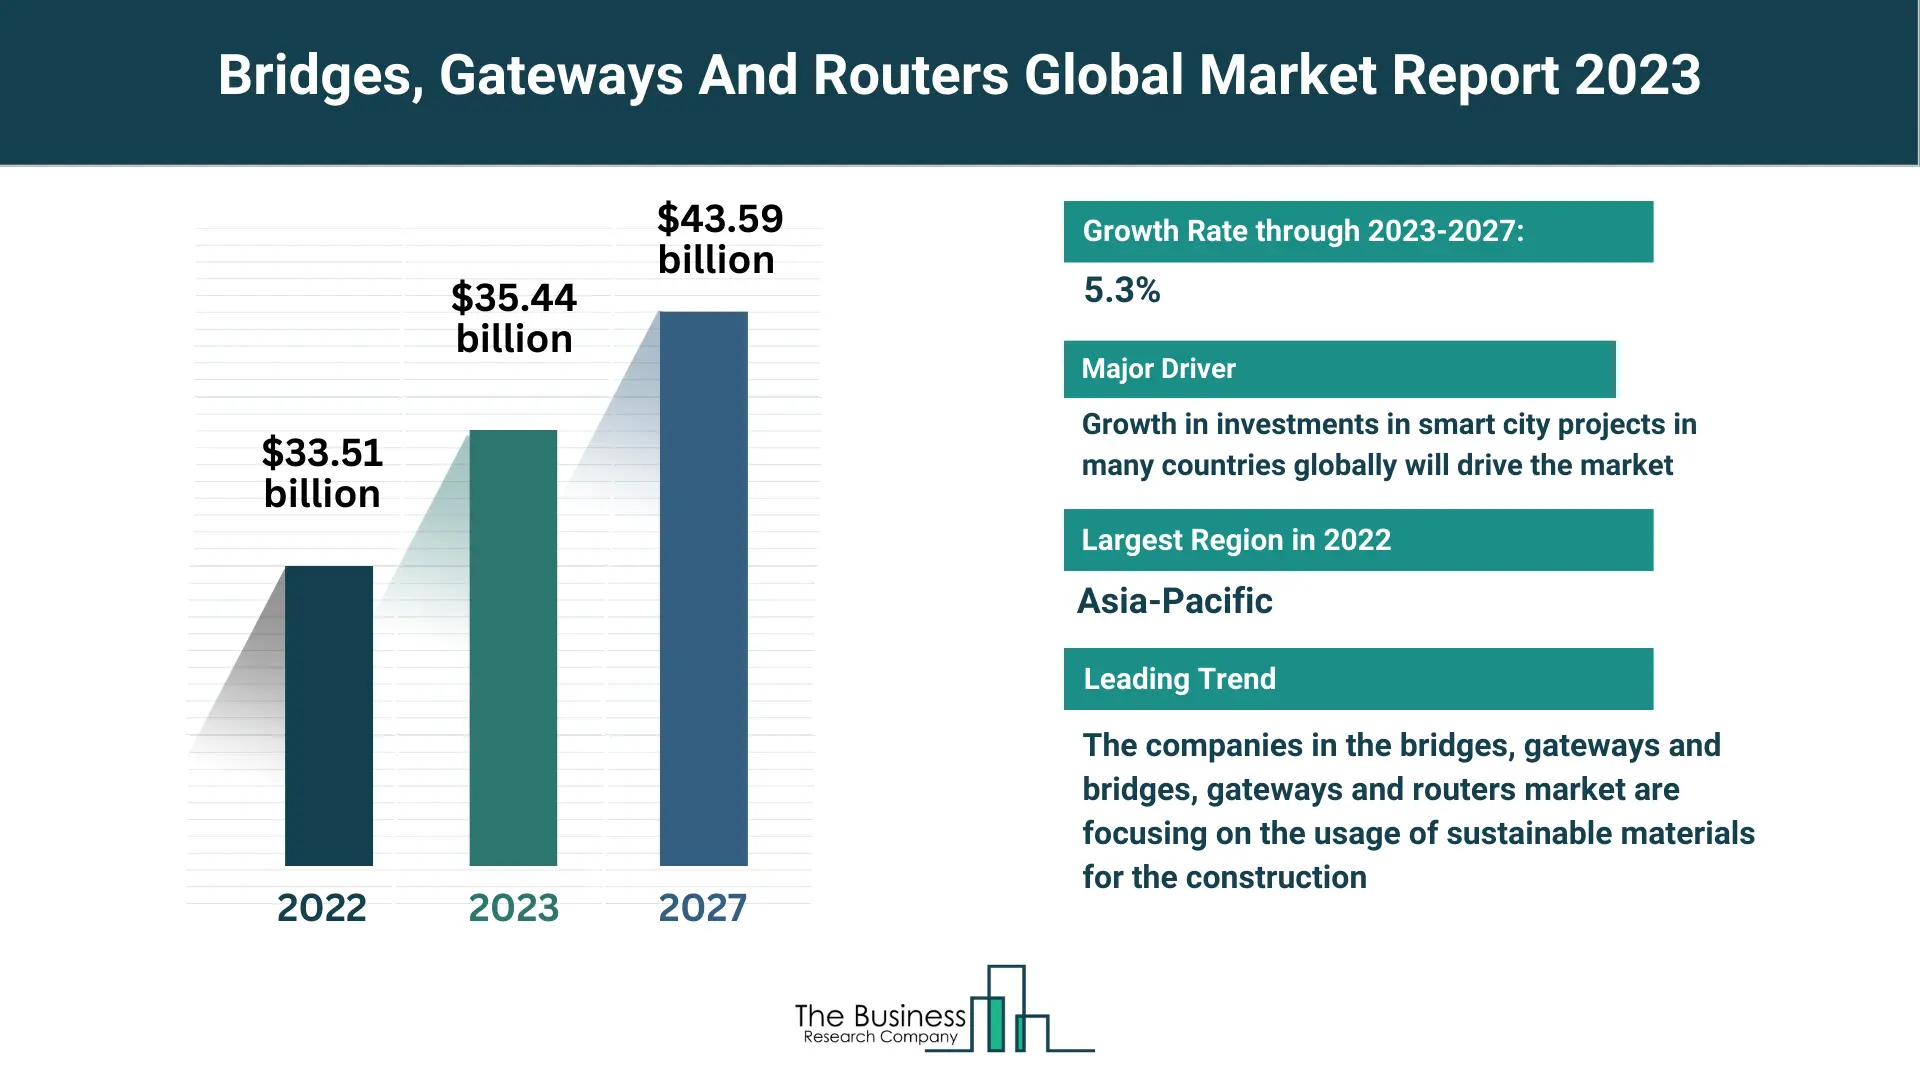 Global Bridges, Gateways And Routers Market Overview 2023: Size, Drivers, And Trends